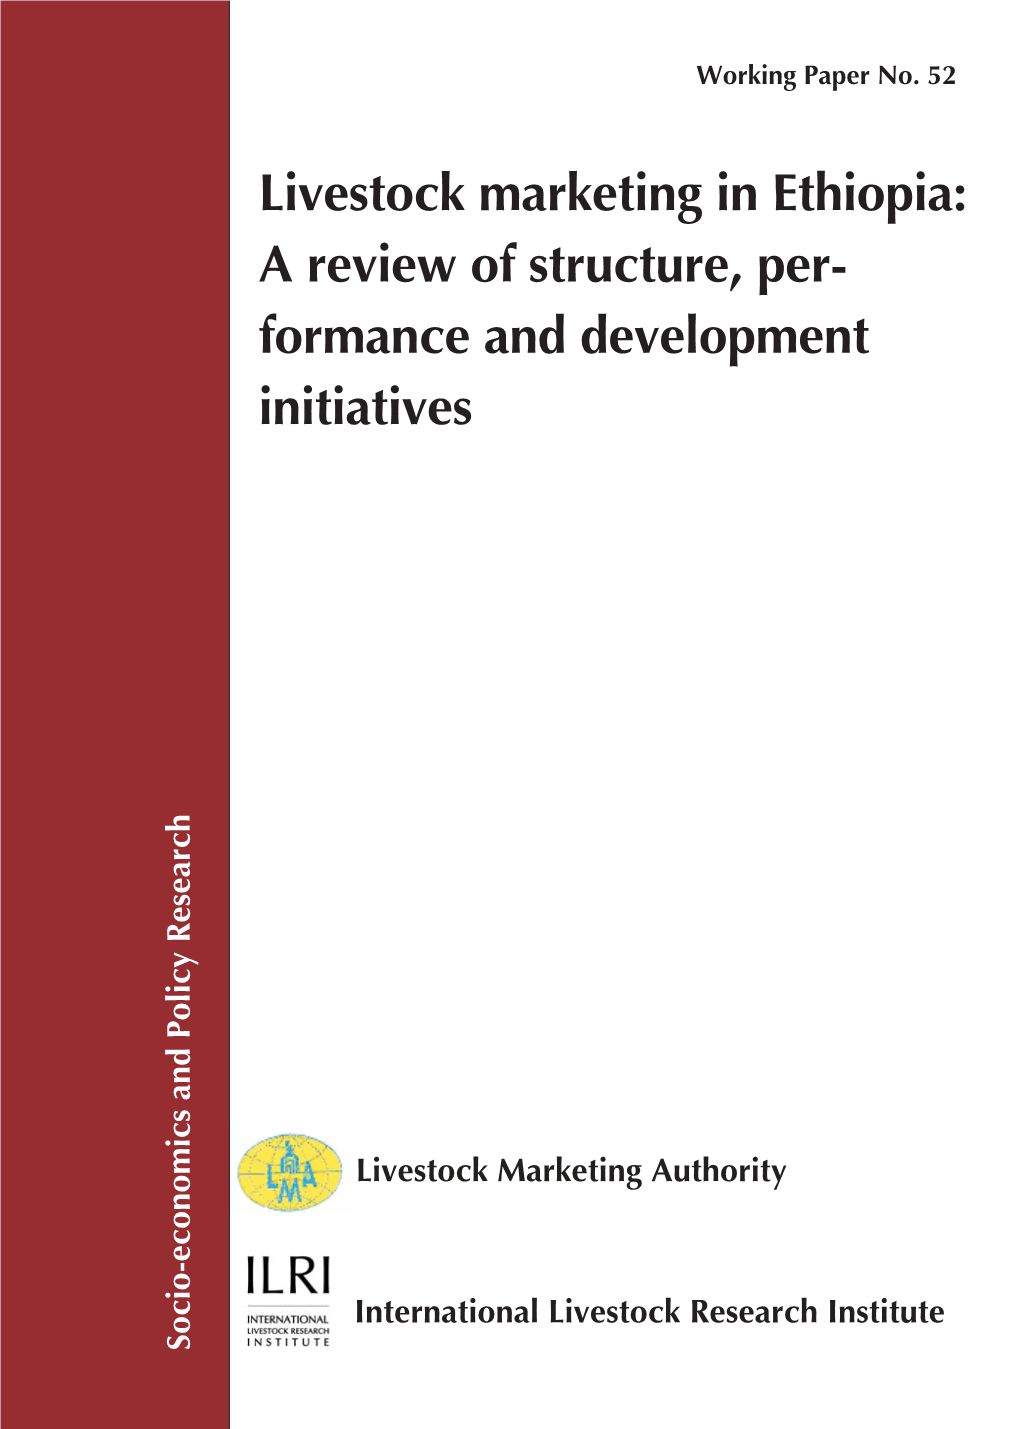 Livestock Marketing in Ethiopia: a Review of Structure, Per- Formance and Development